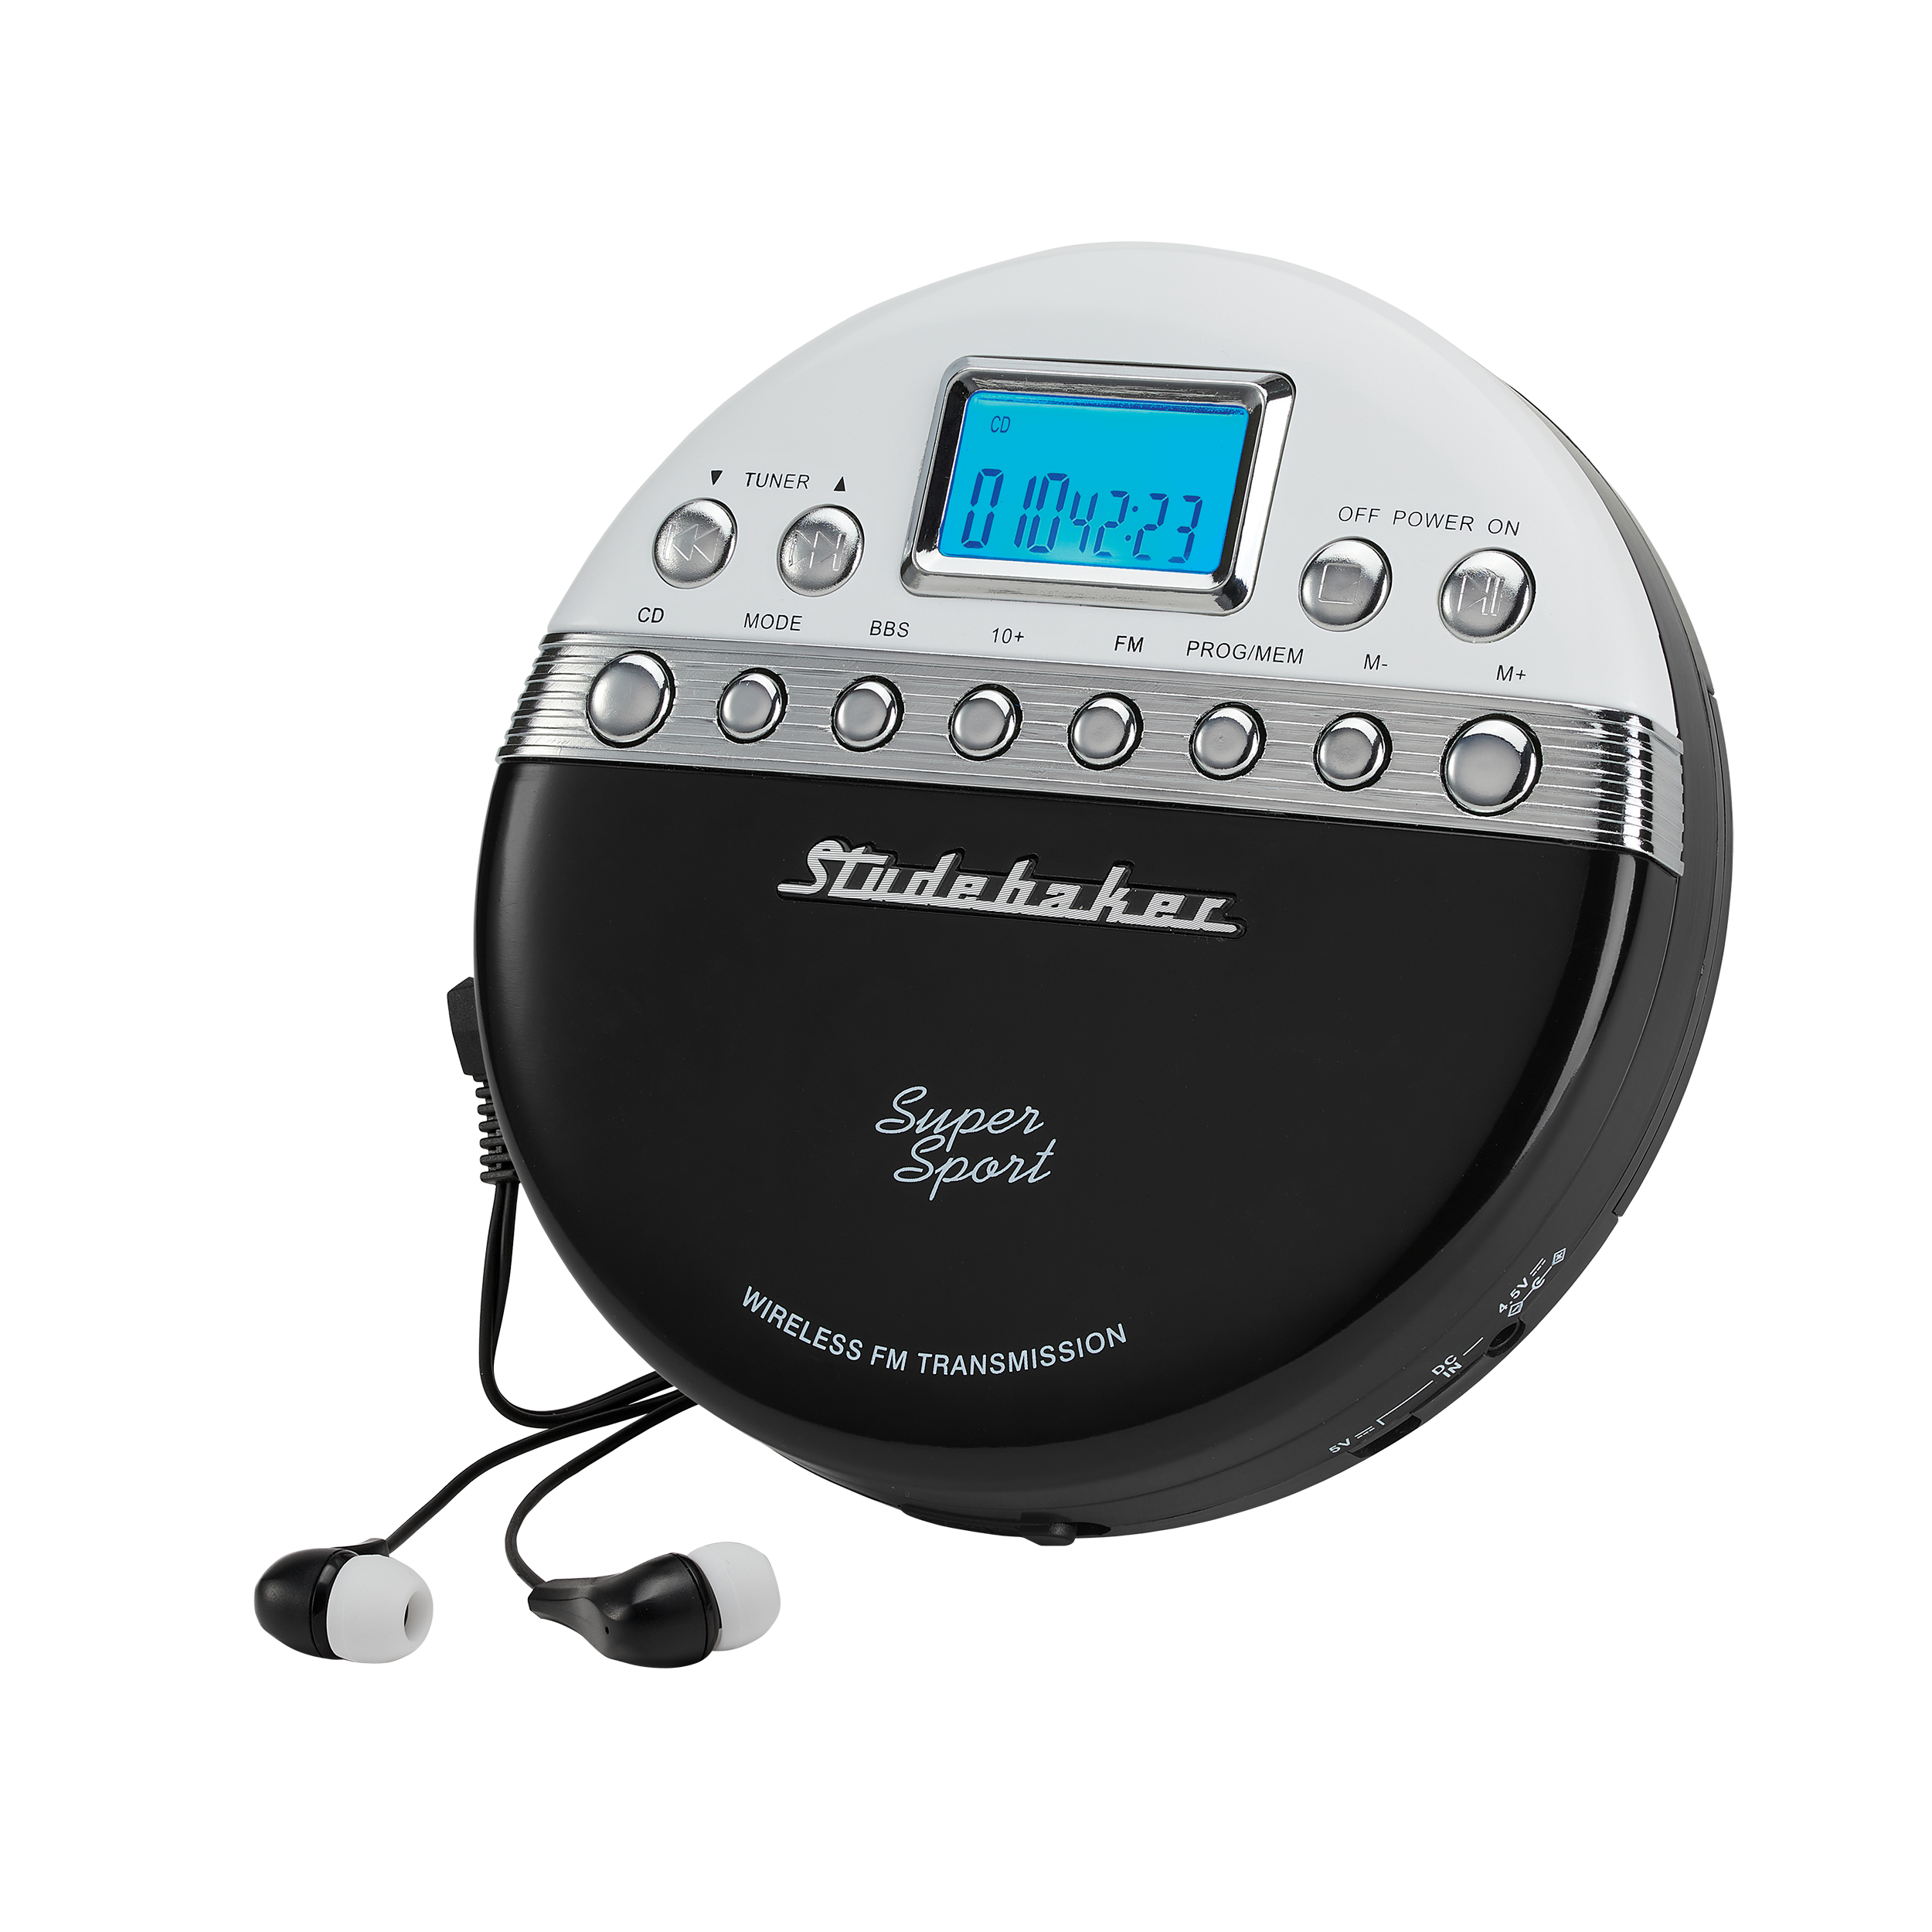 Studebaker SB3705BW Super Sport Portable CD Player Plays CDs Wirelessly Through your Car Radio Includes FM Stereo Radio and Color Coordinated Stereo Earbuds - image 1 of 5